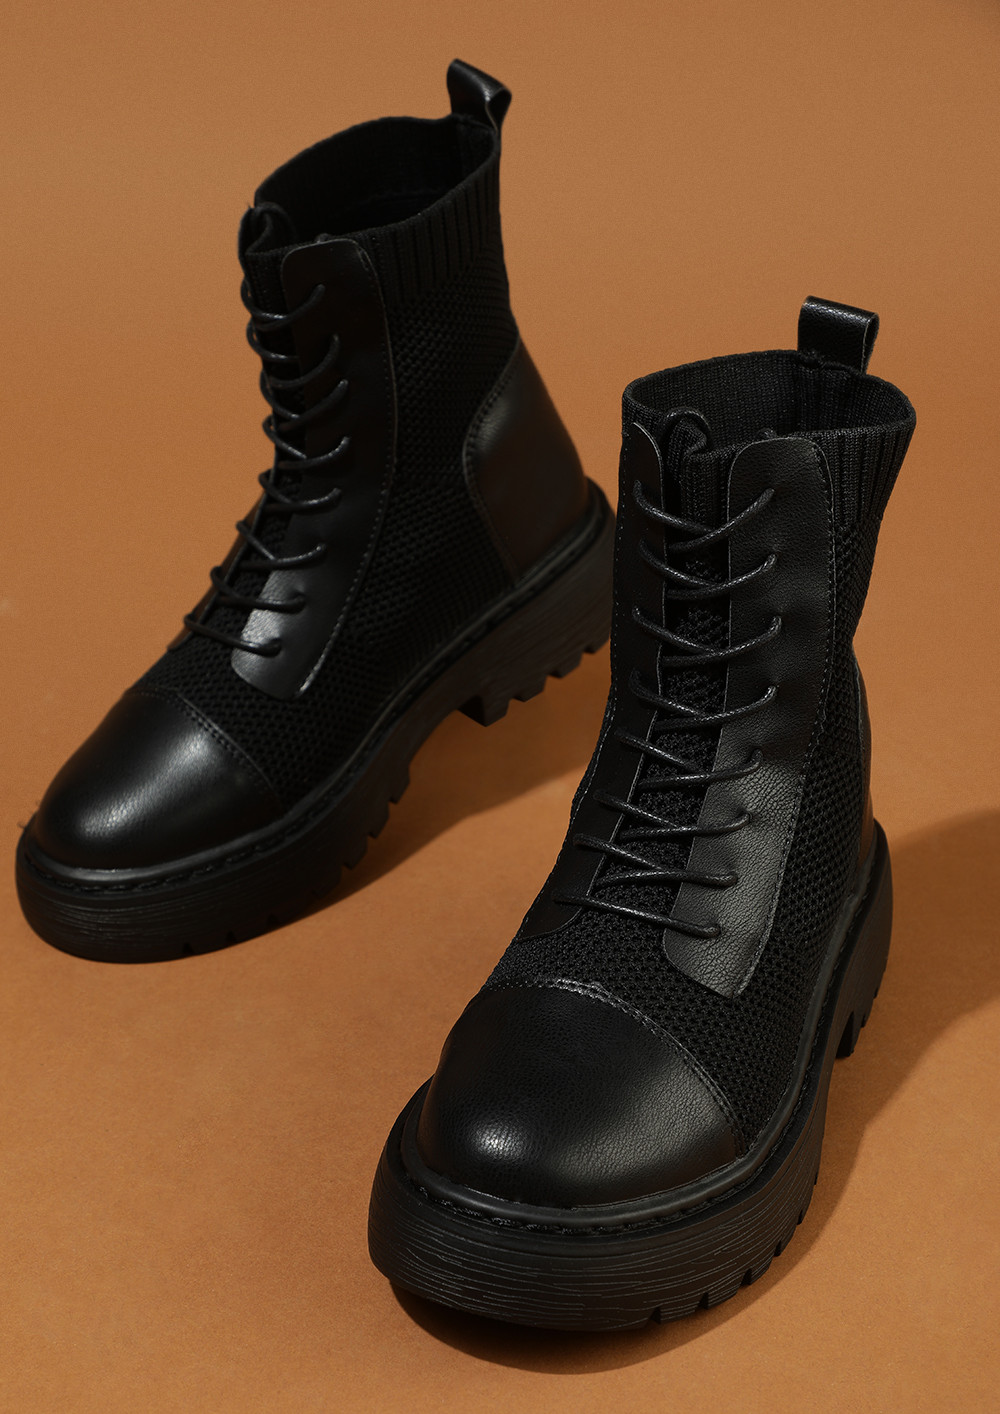 MARCH PAST THE HATERS BLACK COMBAT BOOTS